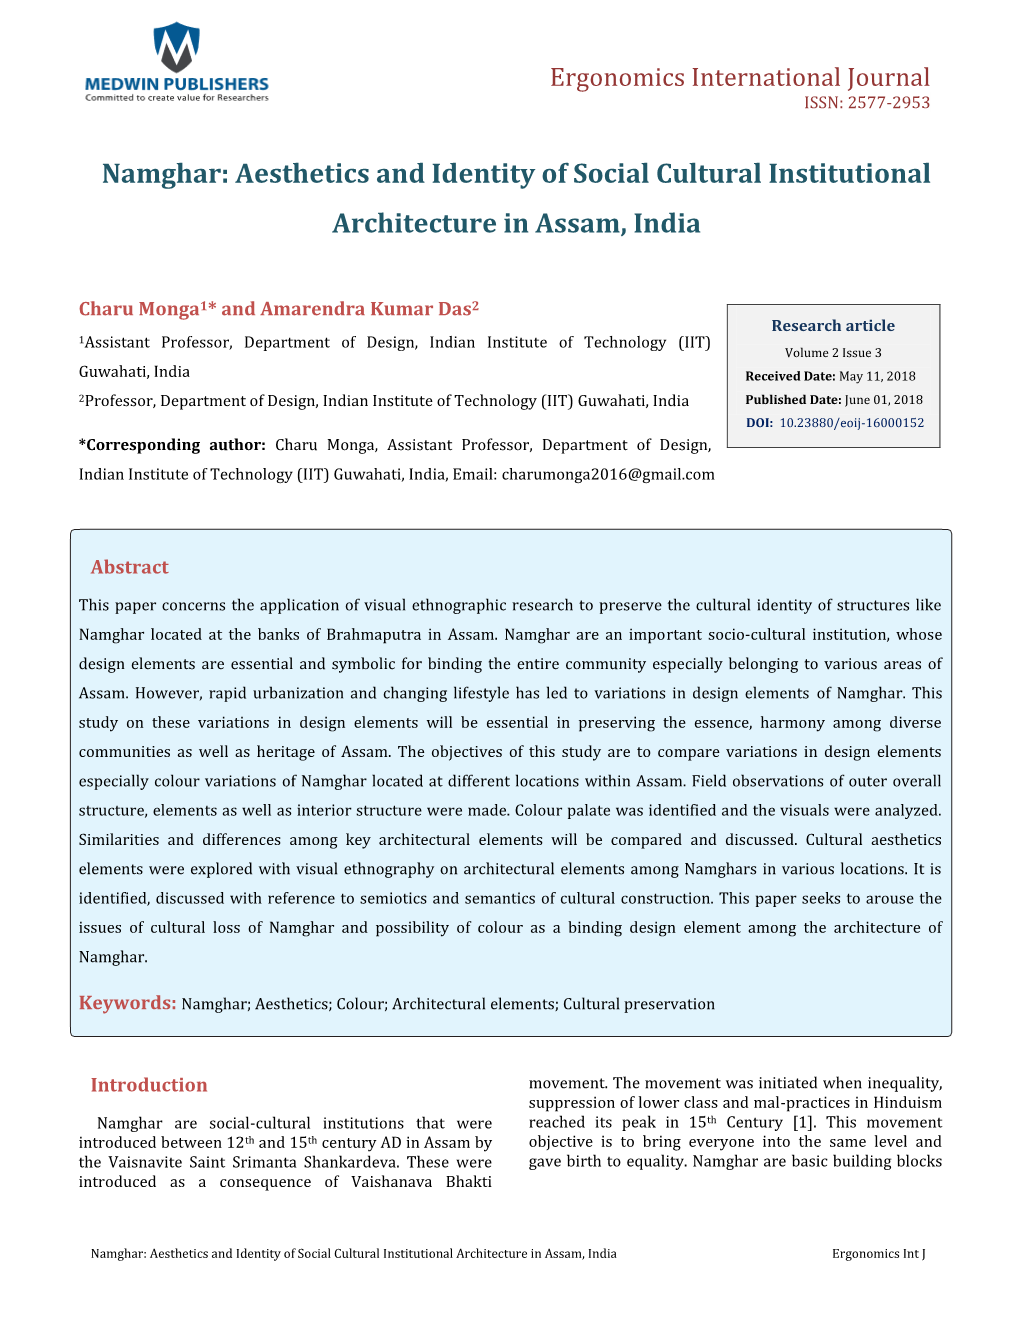 Namghar: Aesthetics and Identity of Social Cultural Institutional Architecture in Assam, India